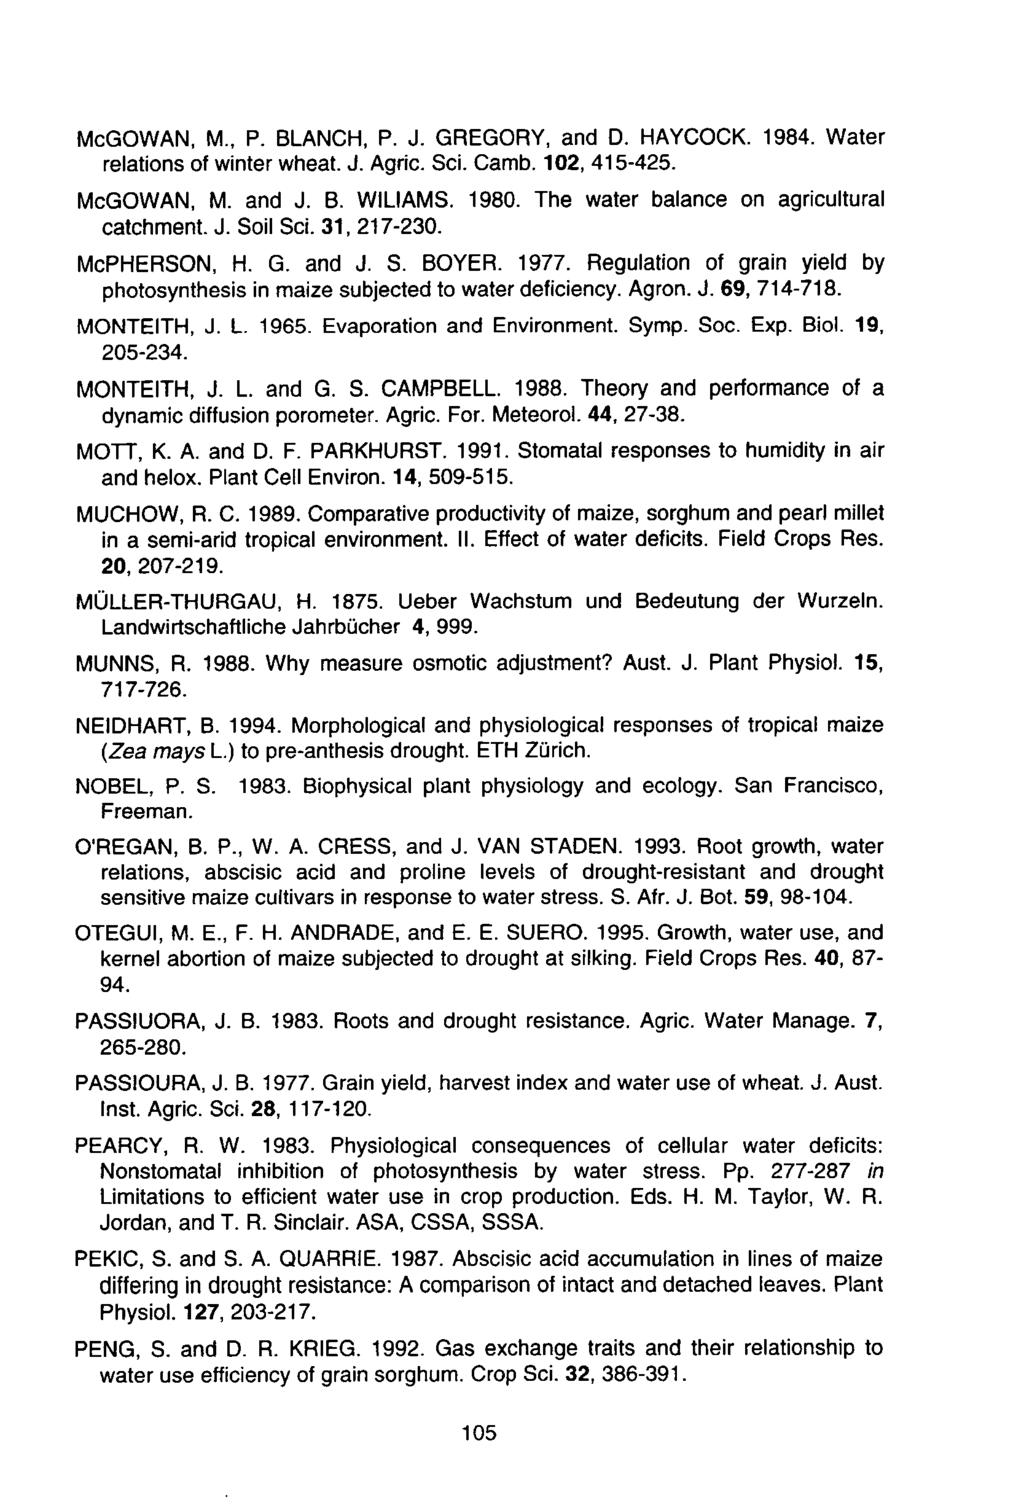 McGOWAN, M, P BLANCH, P J GREGORY, nd D HAYCOCK 1984 Wter reltions of winter whet J Agnc Sci Cmb 102,415-425 McGOWAN, M nd J B WILIAMS 1980 The wter blnce on griculturl ctchment J Soil Sci 1,217-20